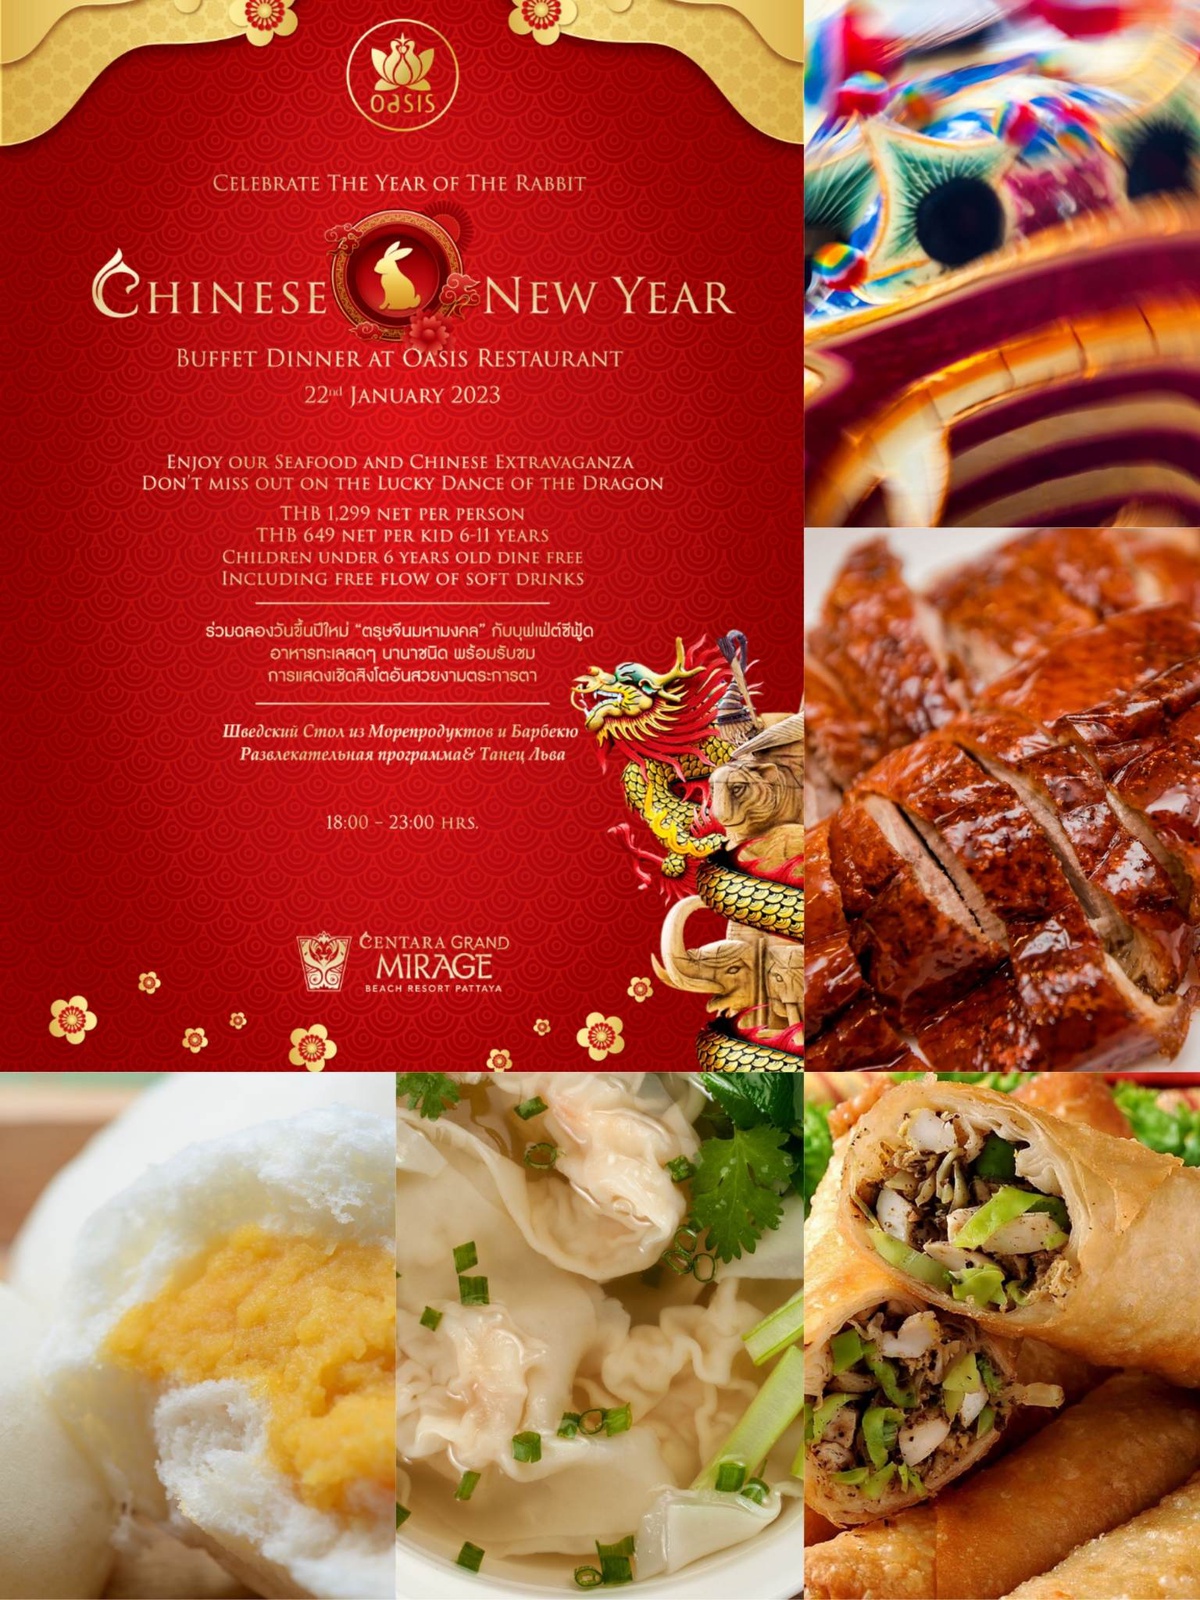 Usher in the year of rabbit to celebrate this prosperous Chinese New Year on 22 January 2023.